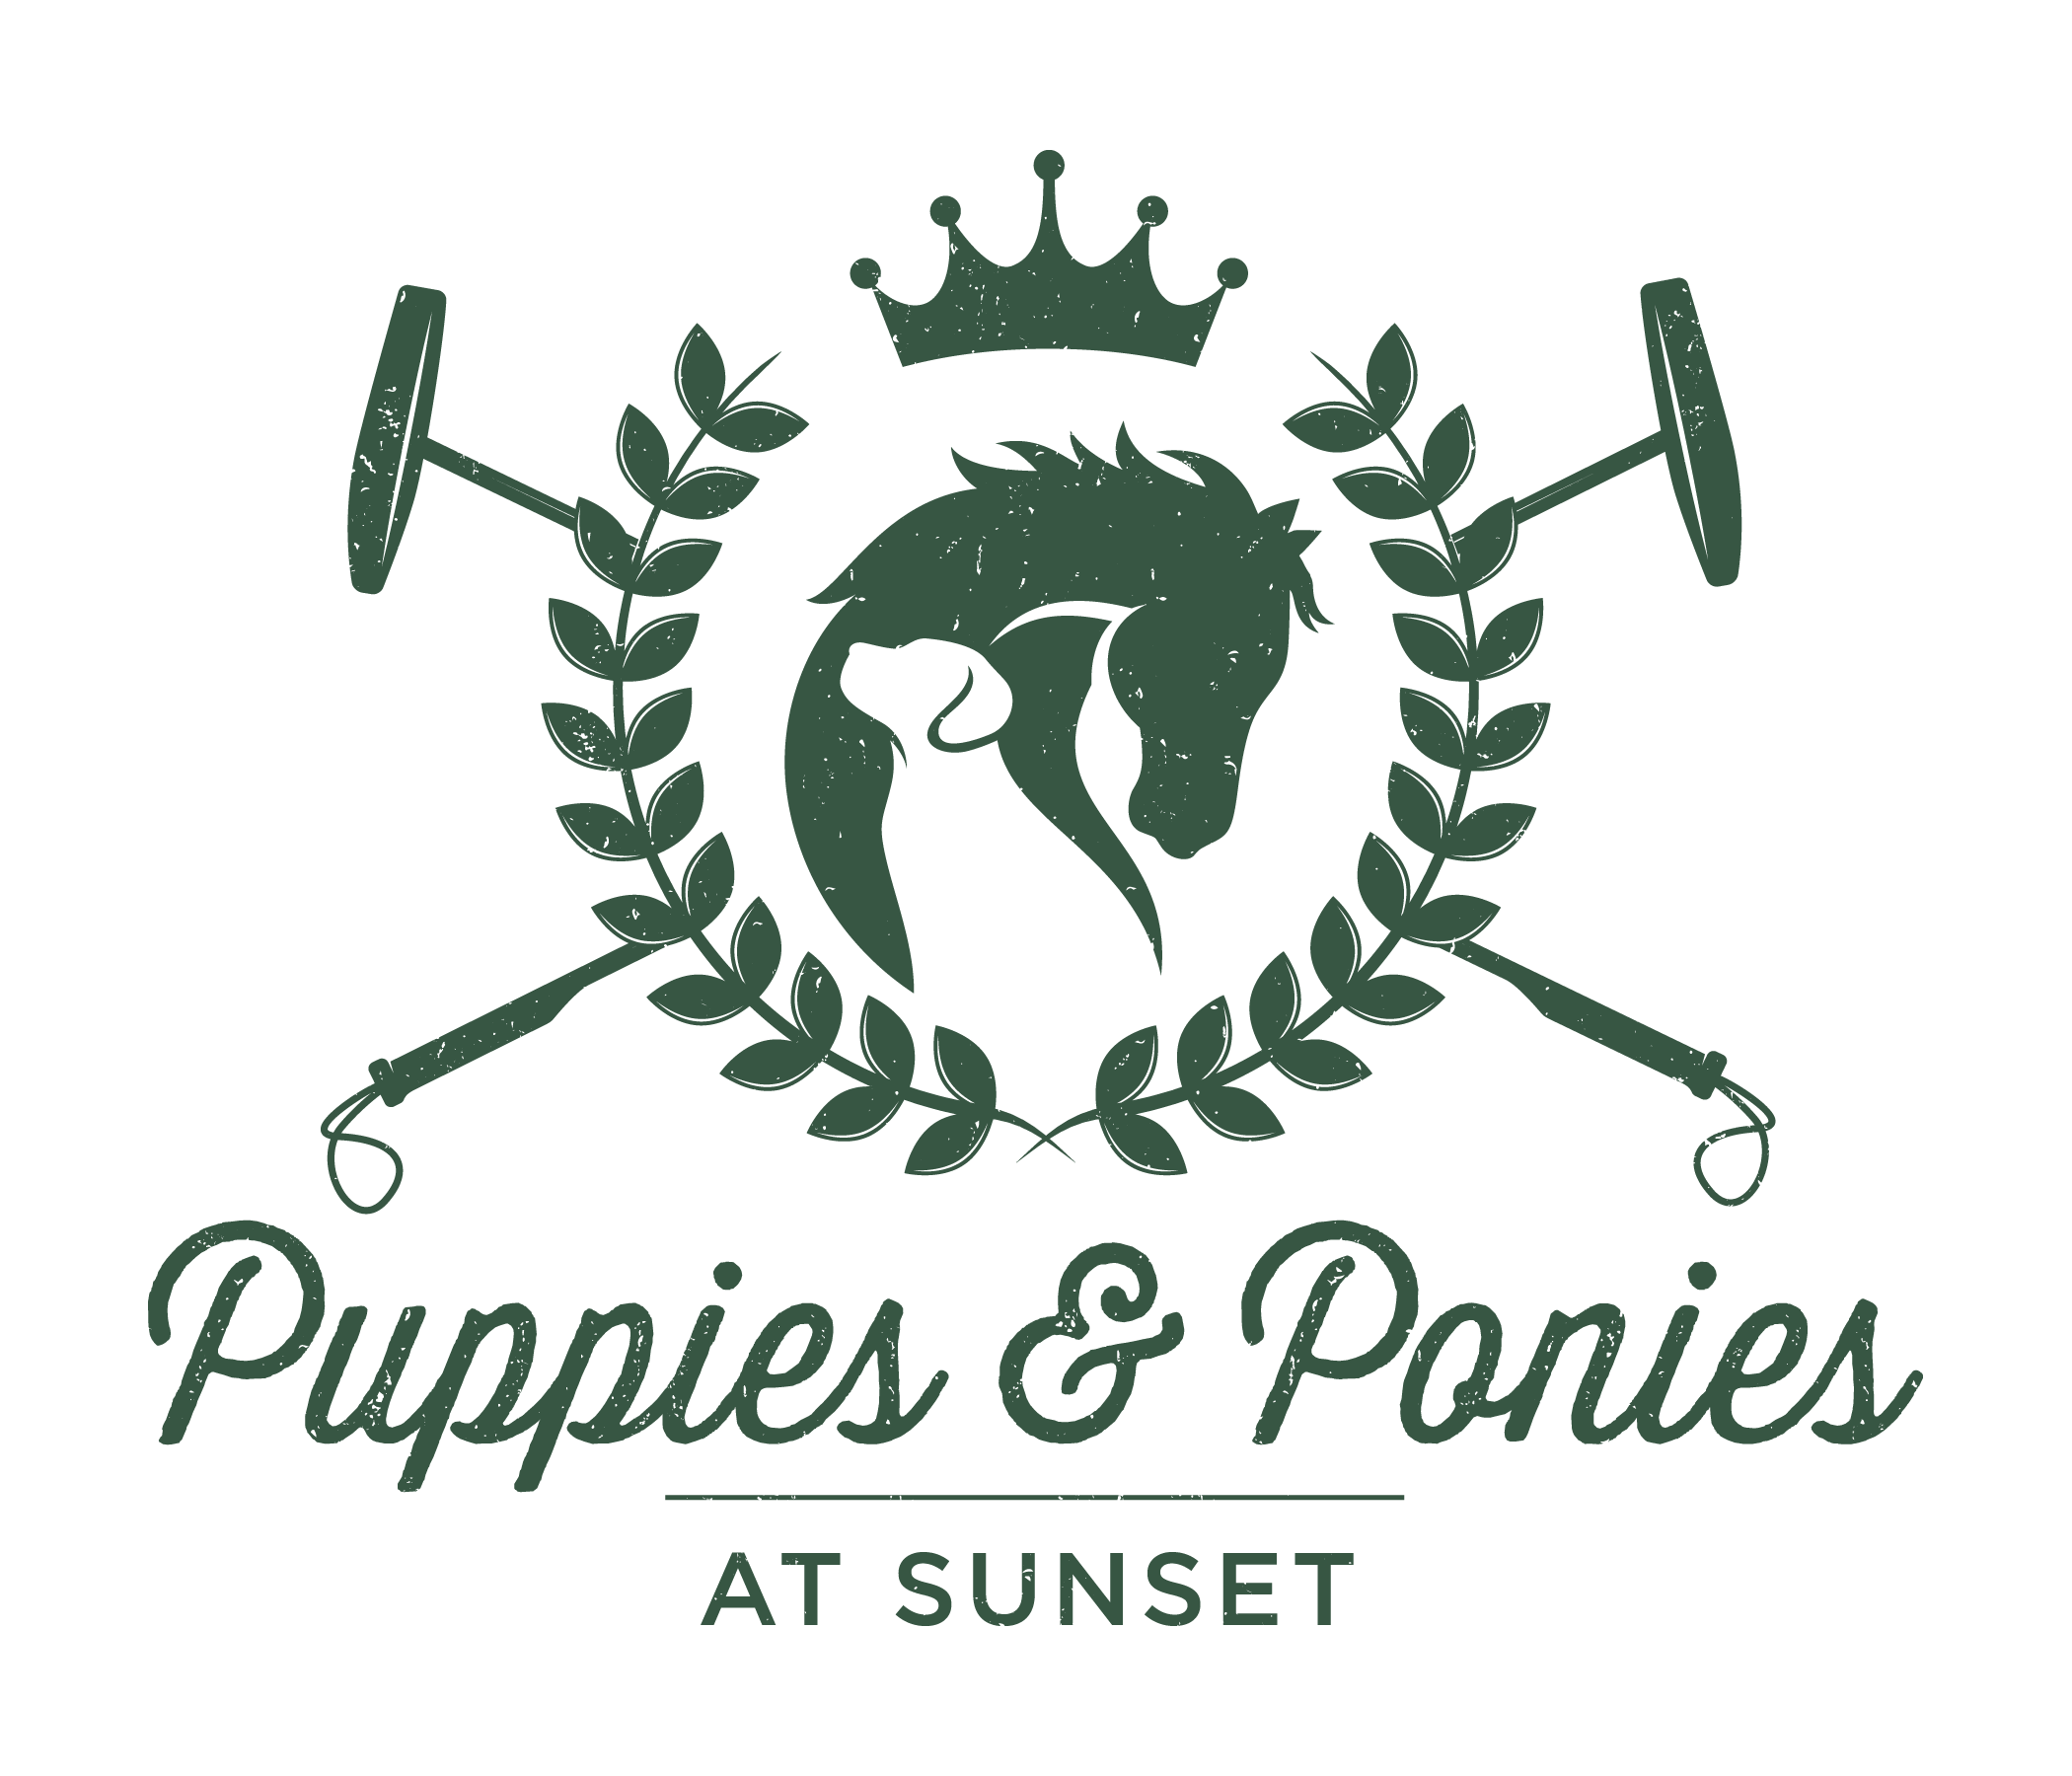 Puppies & Ponies at Sunset